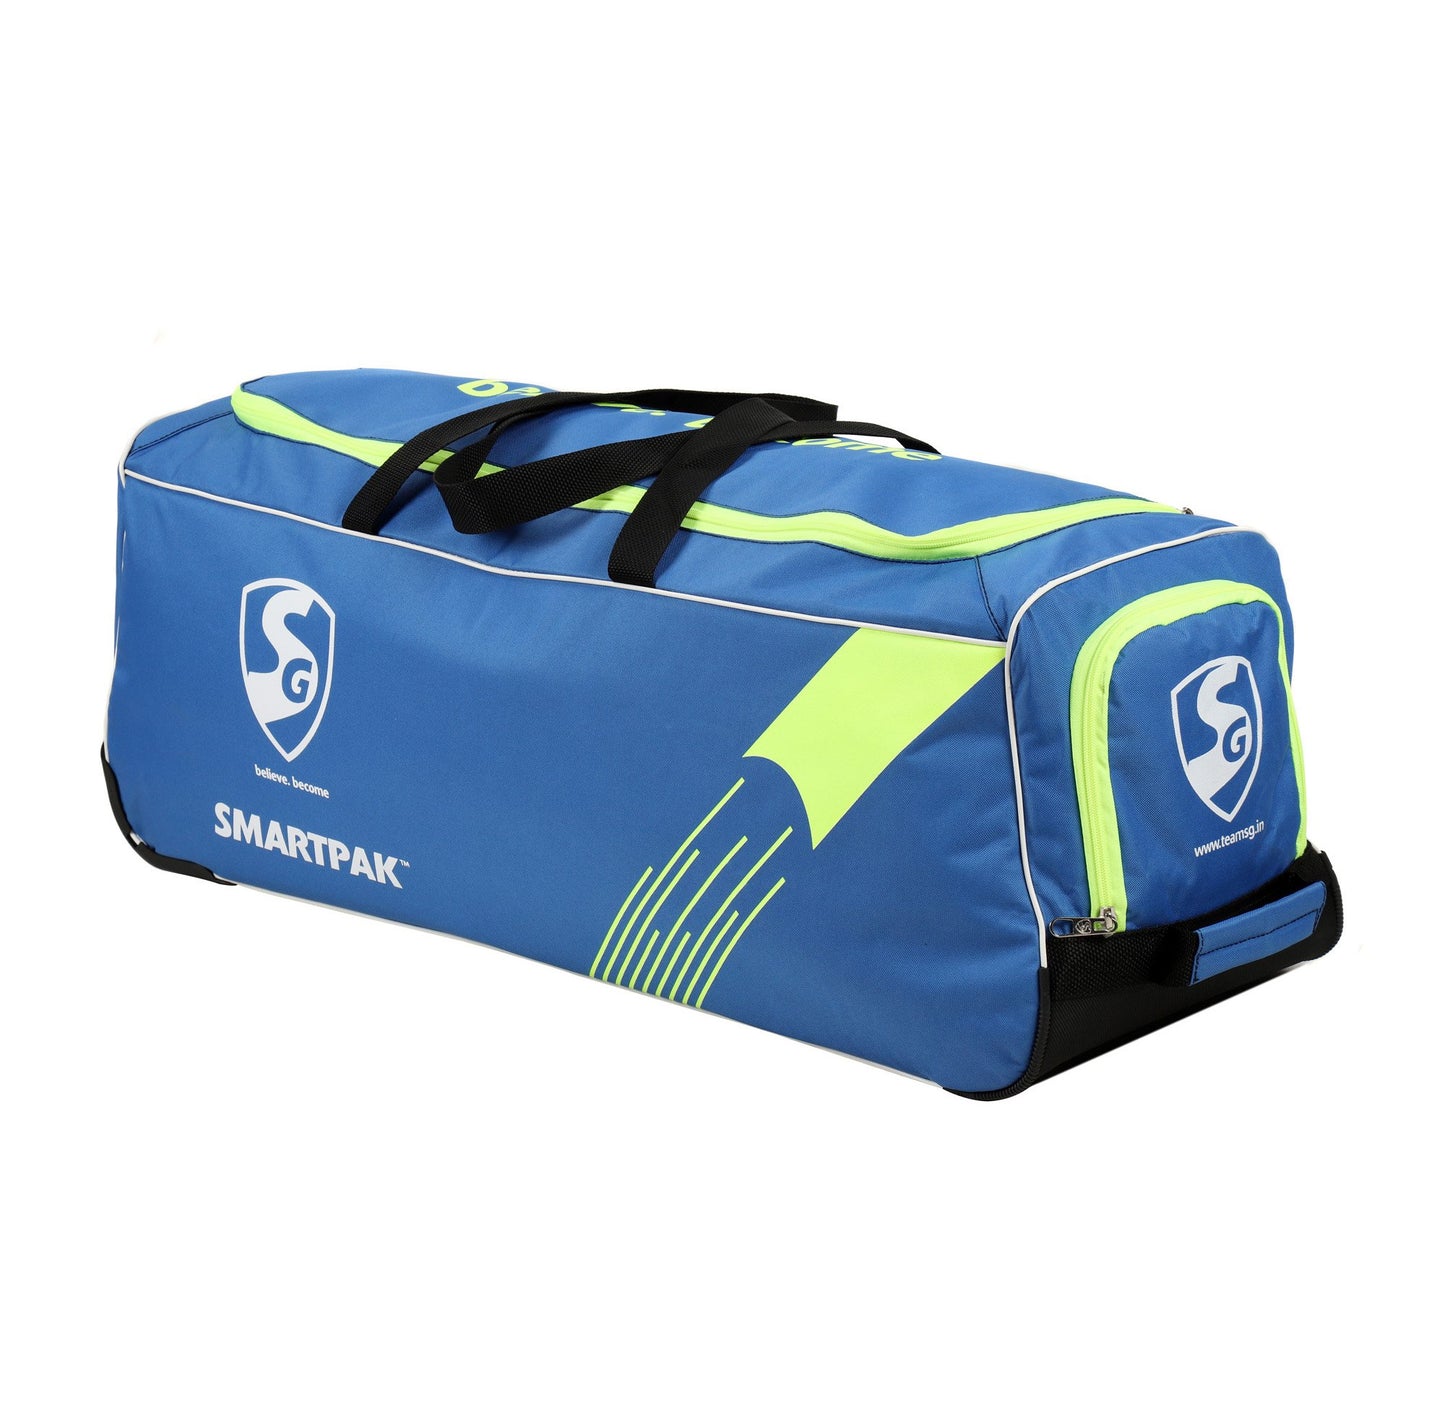 SG Smartpak kit bag with shoe compartment with wheel